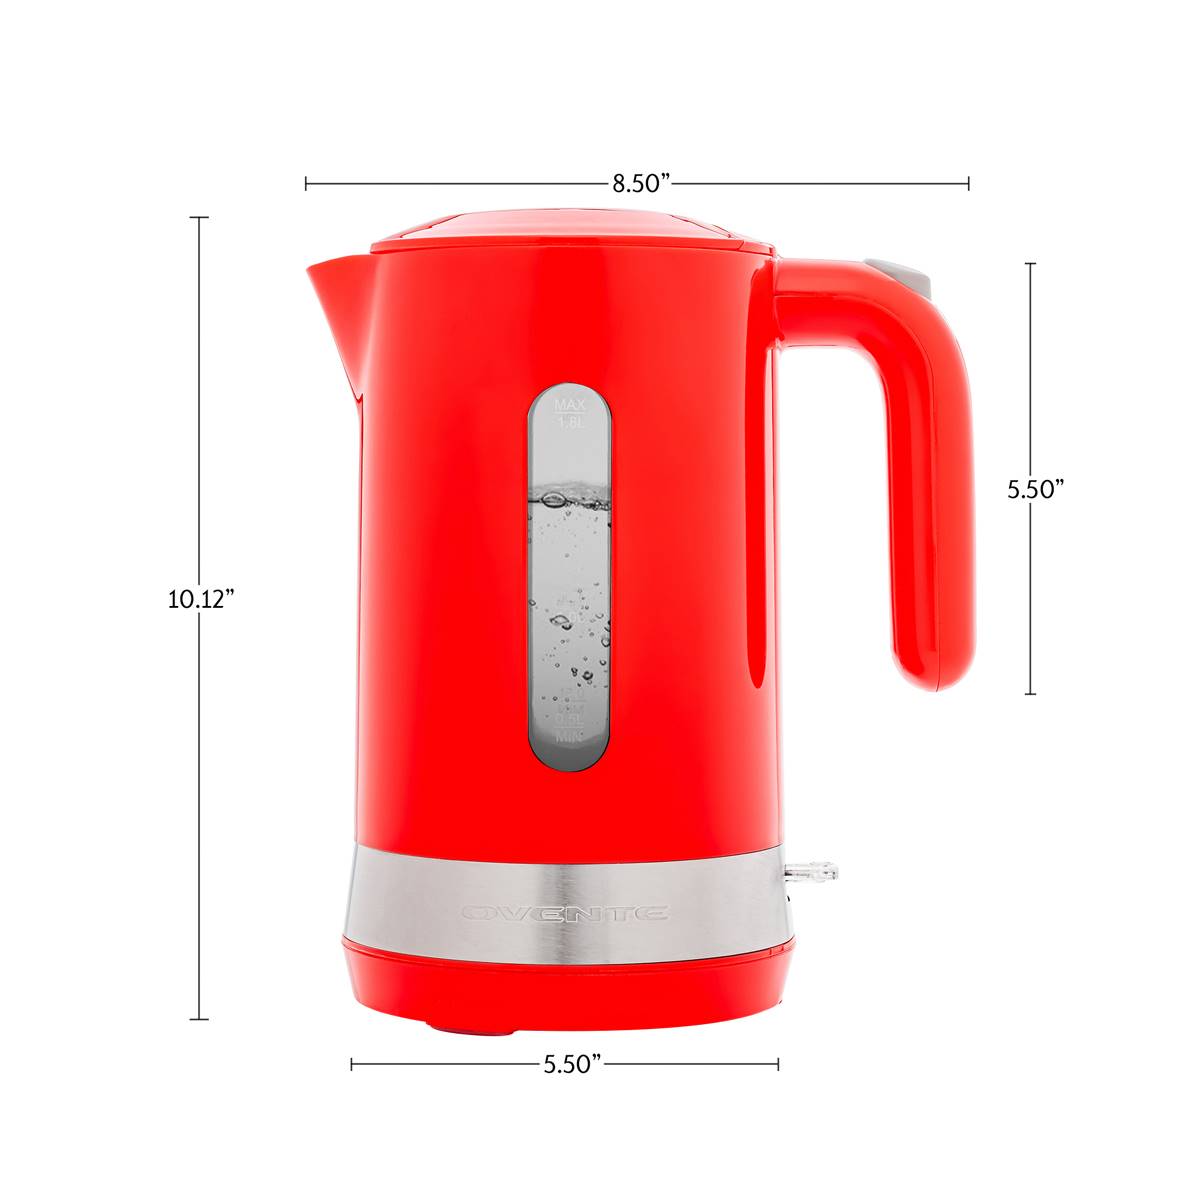 Ovente 1.8 Liter Electric Kettle W/ ProntoFill(tm) Lid - Red